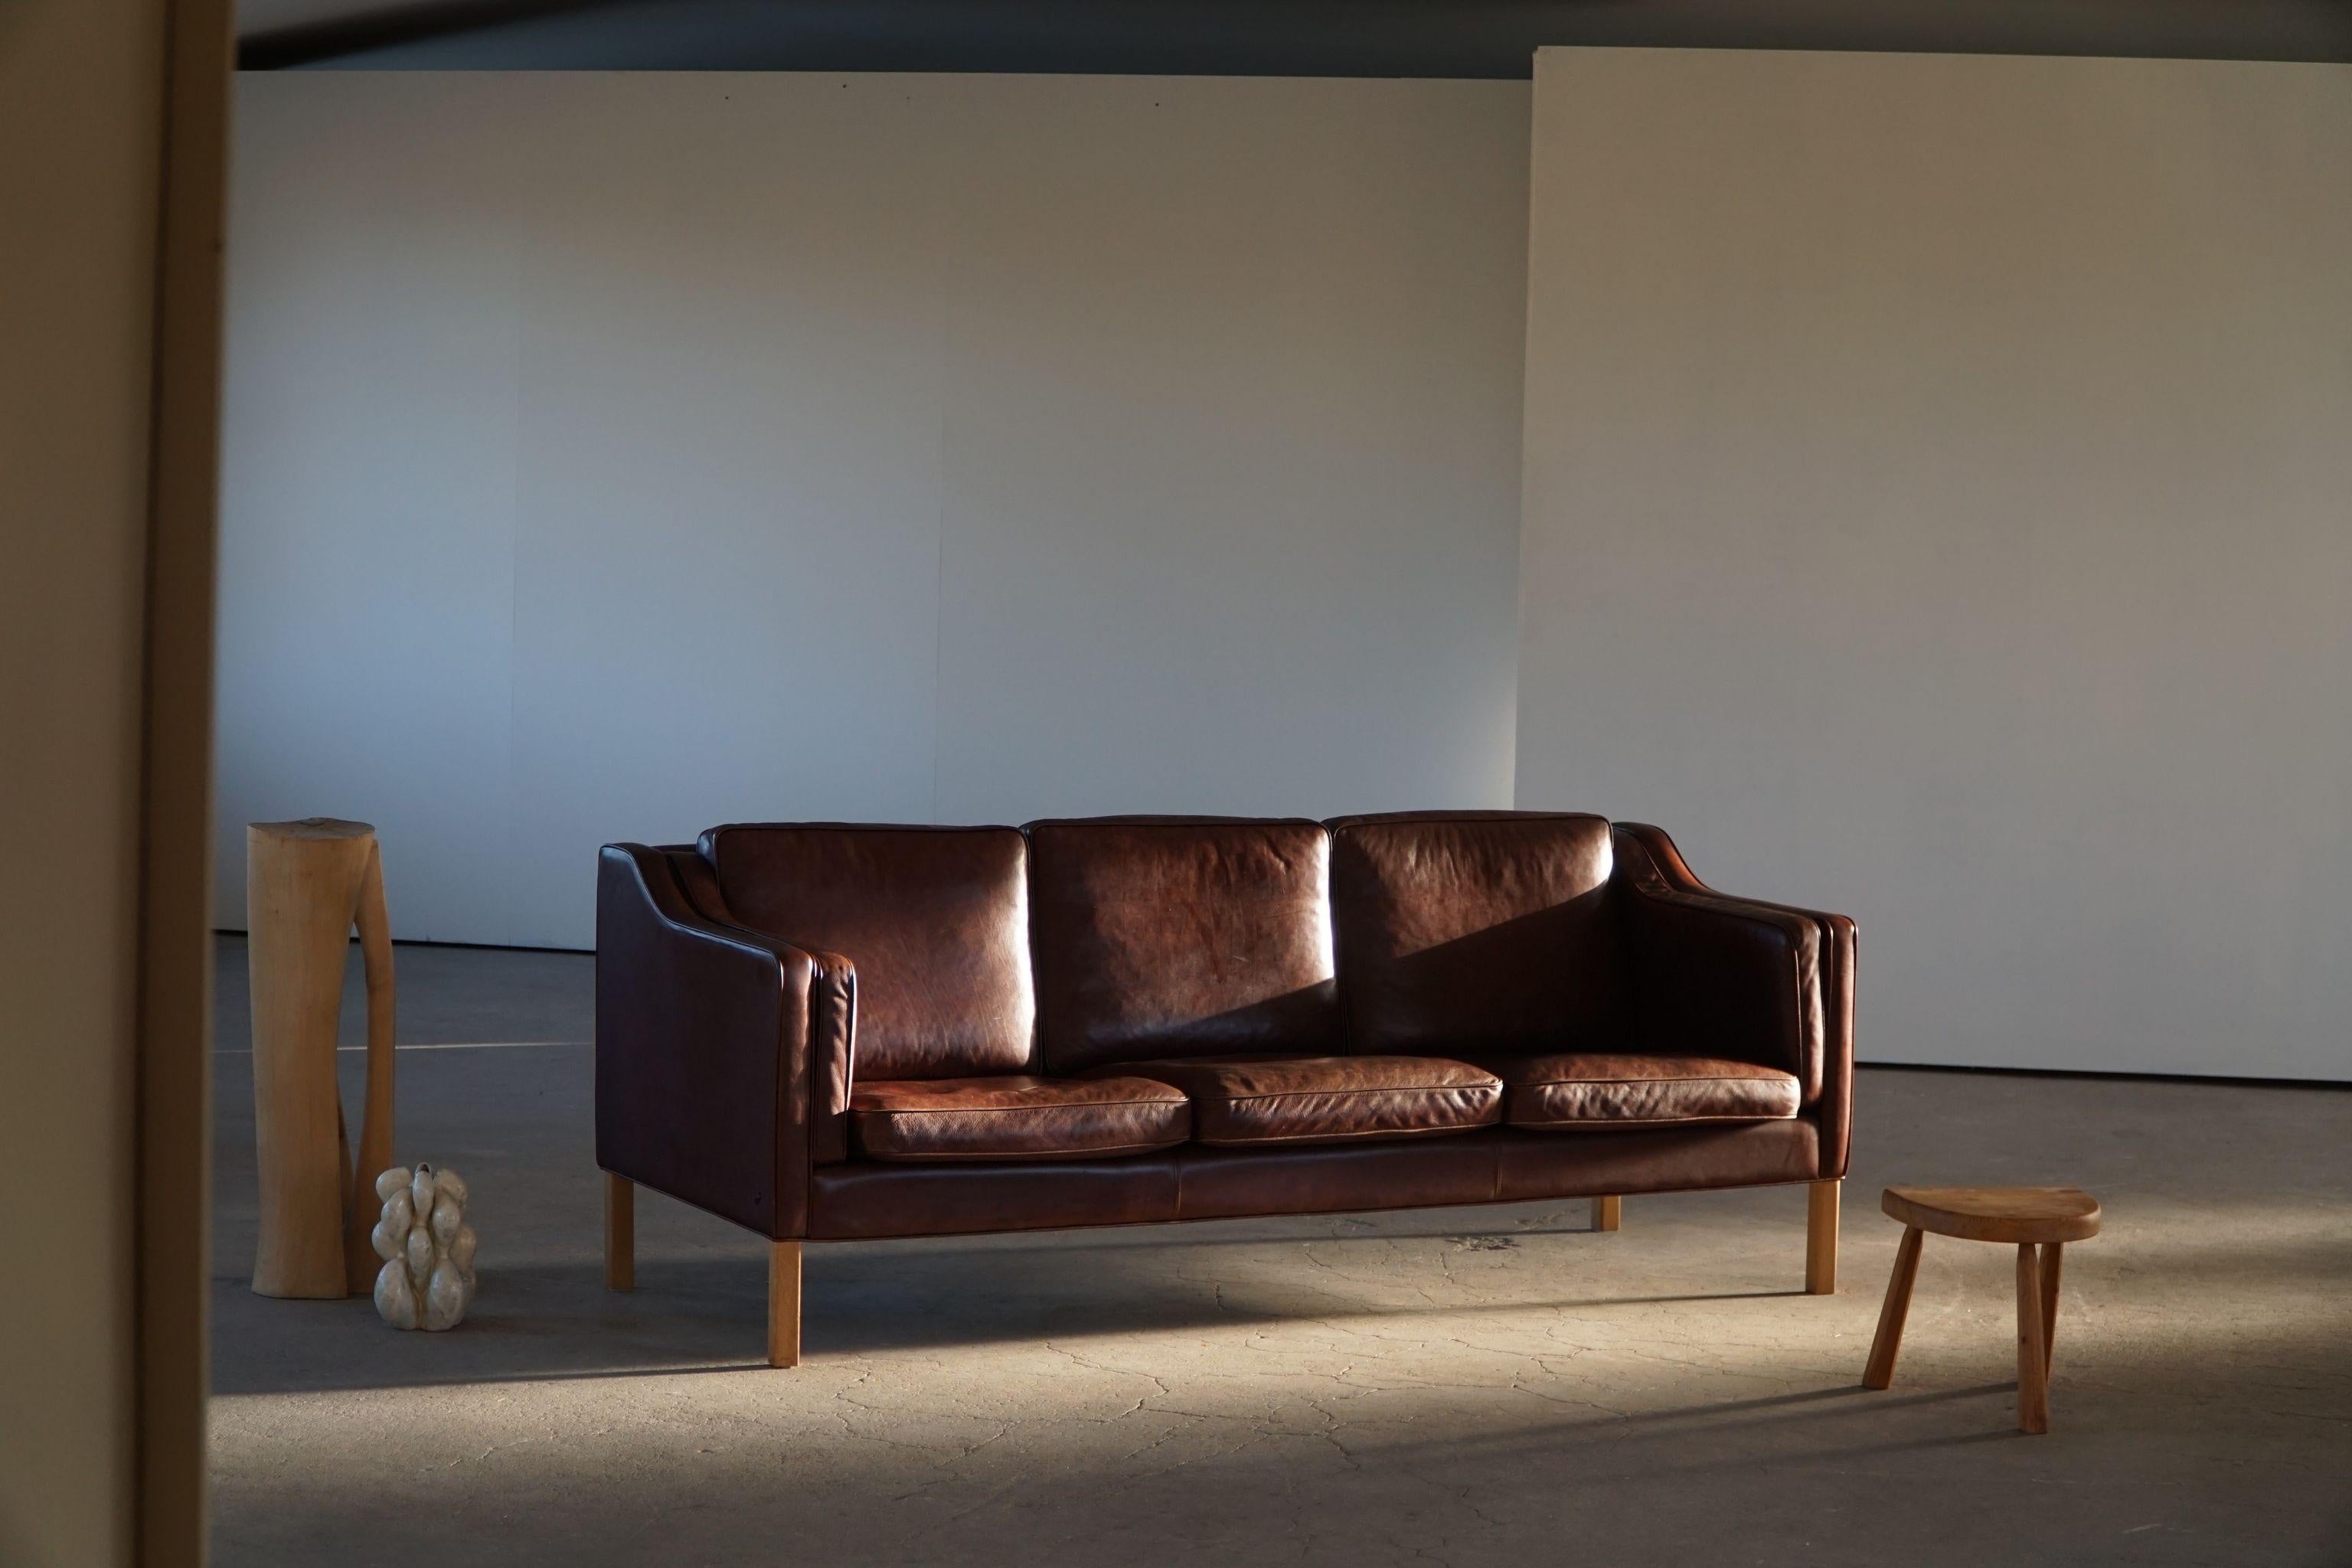 A classic Danish Mordern 3-seater sofa in brown leather, feets made in solid beech. Simple lines and a great comfort featured in this sofa. Designed by Hurup Møbelfabrik, Denmark. Made in 1970s.

This beautiful sofa will complement many interior